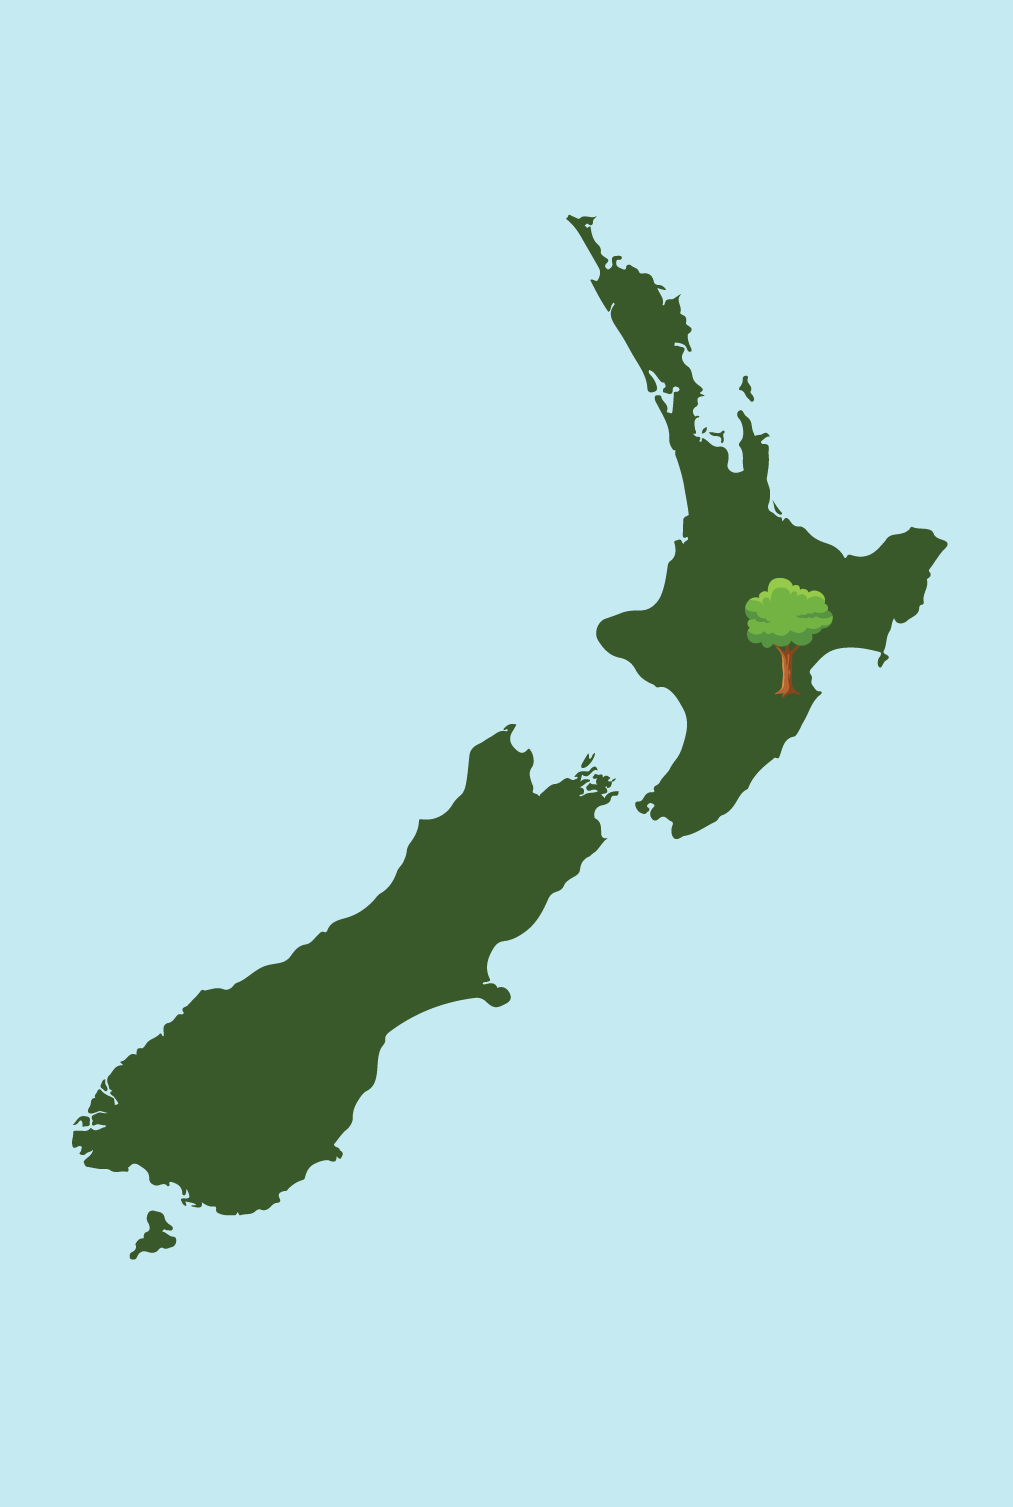 New Zealand map with Hawke's Bay marked